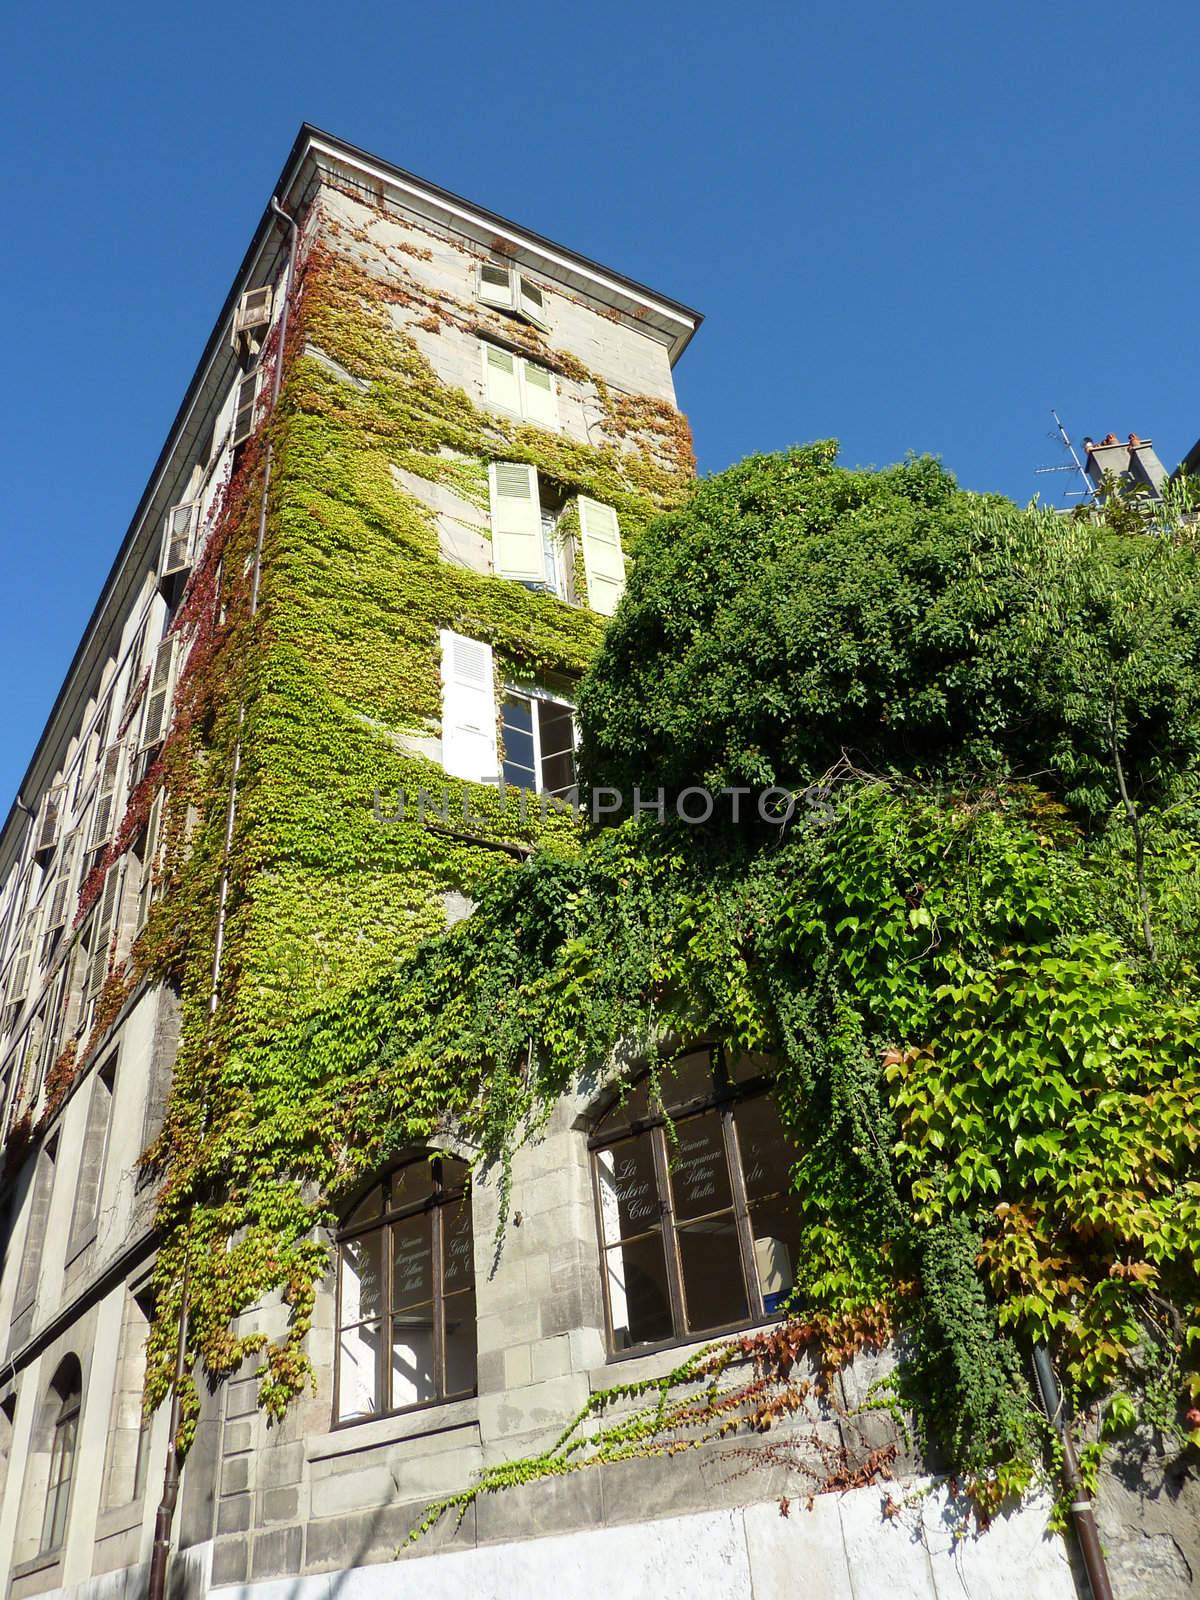 Ivy on old house by Elenaphotos21